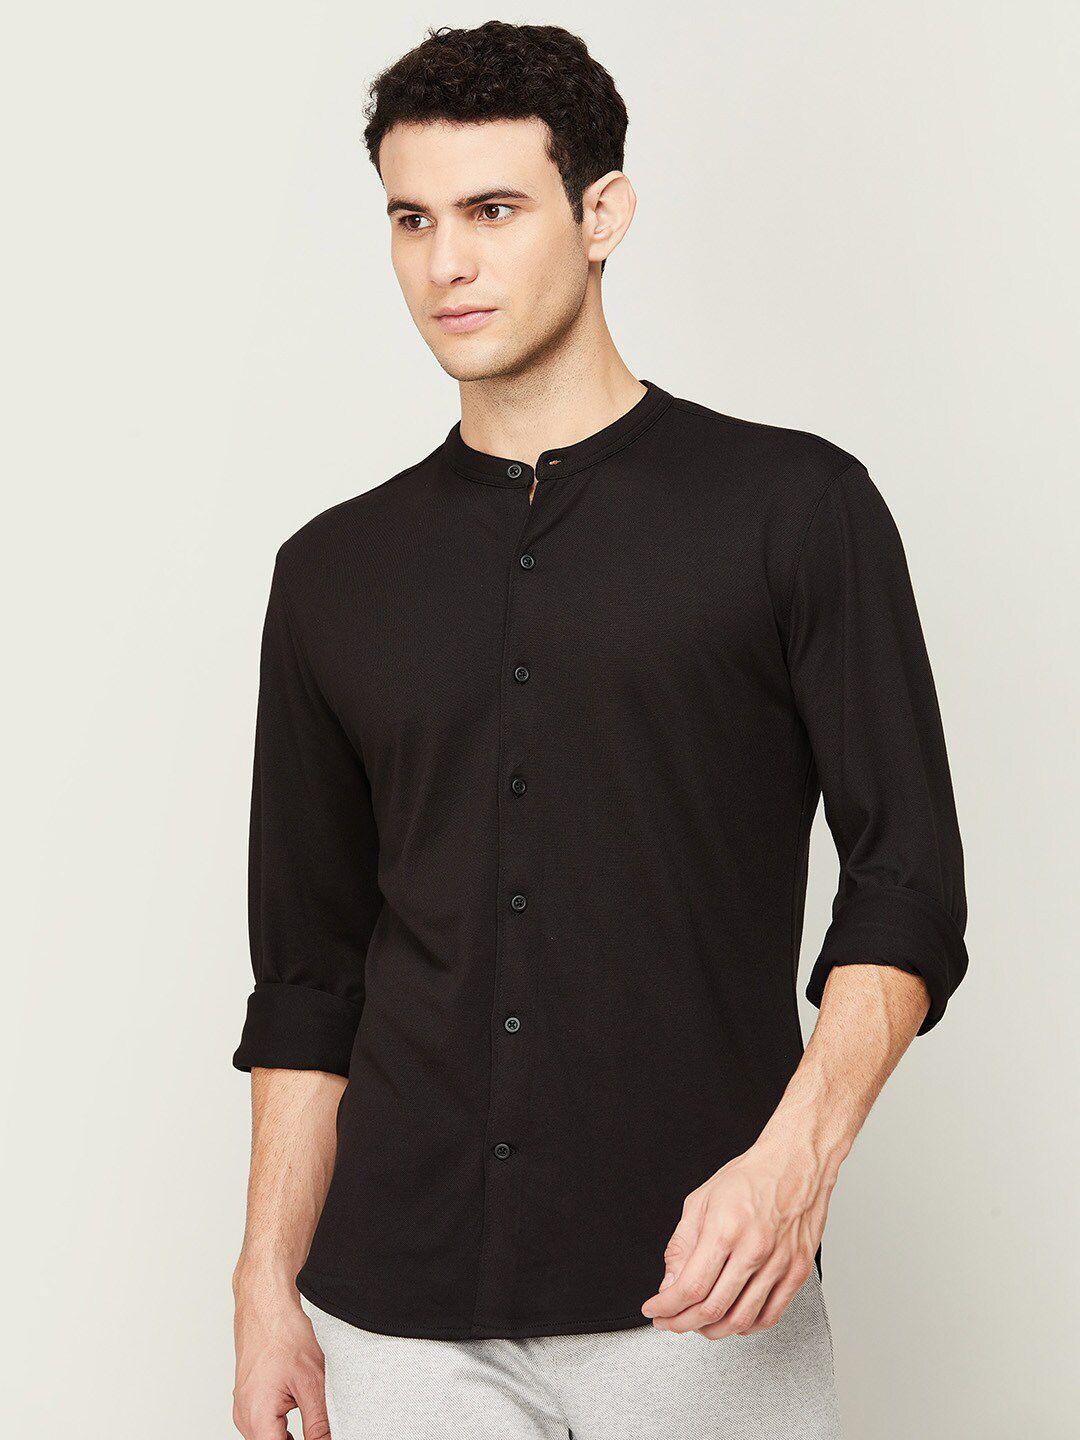 code by lifestyle men black casual shirt